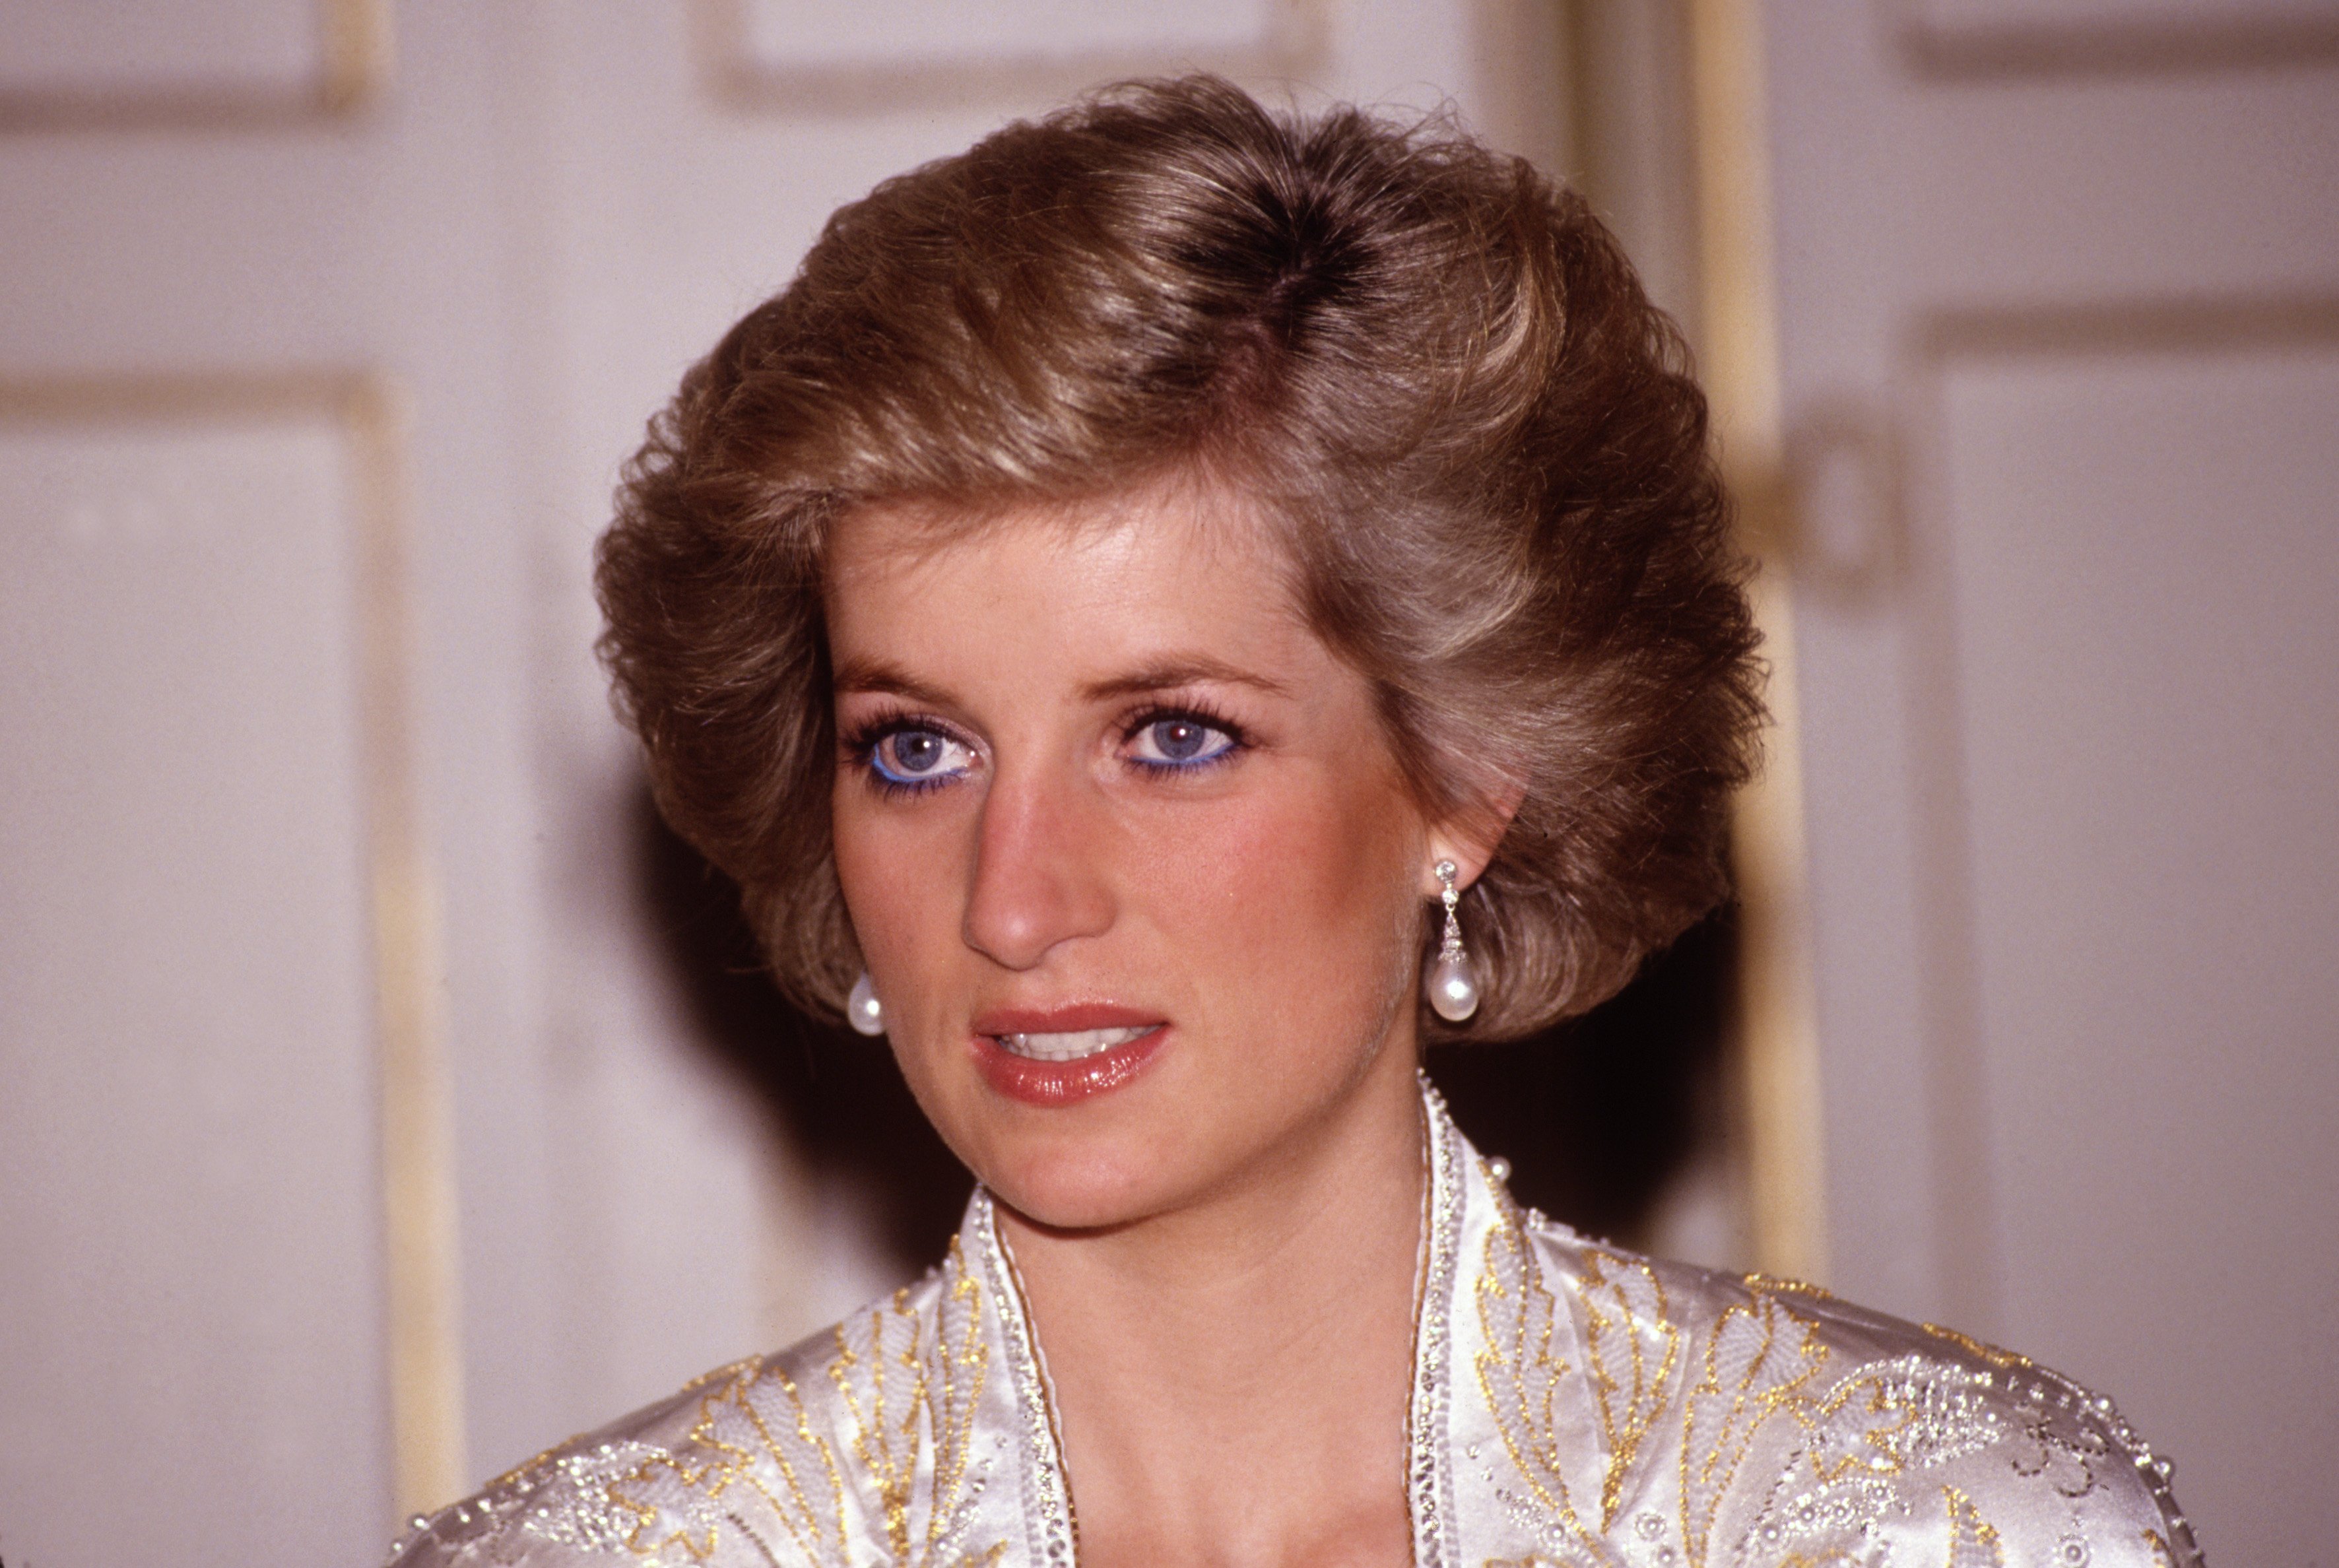 Diana Princess of Wales at a dinner given by President Mitterand in November, 1988 at the Elysee Palace in Paris, France | Source: Getty Images